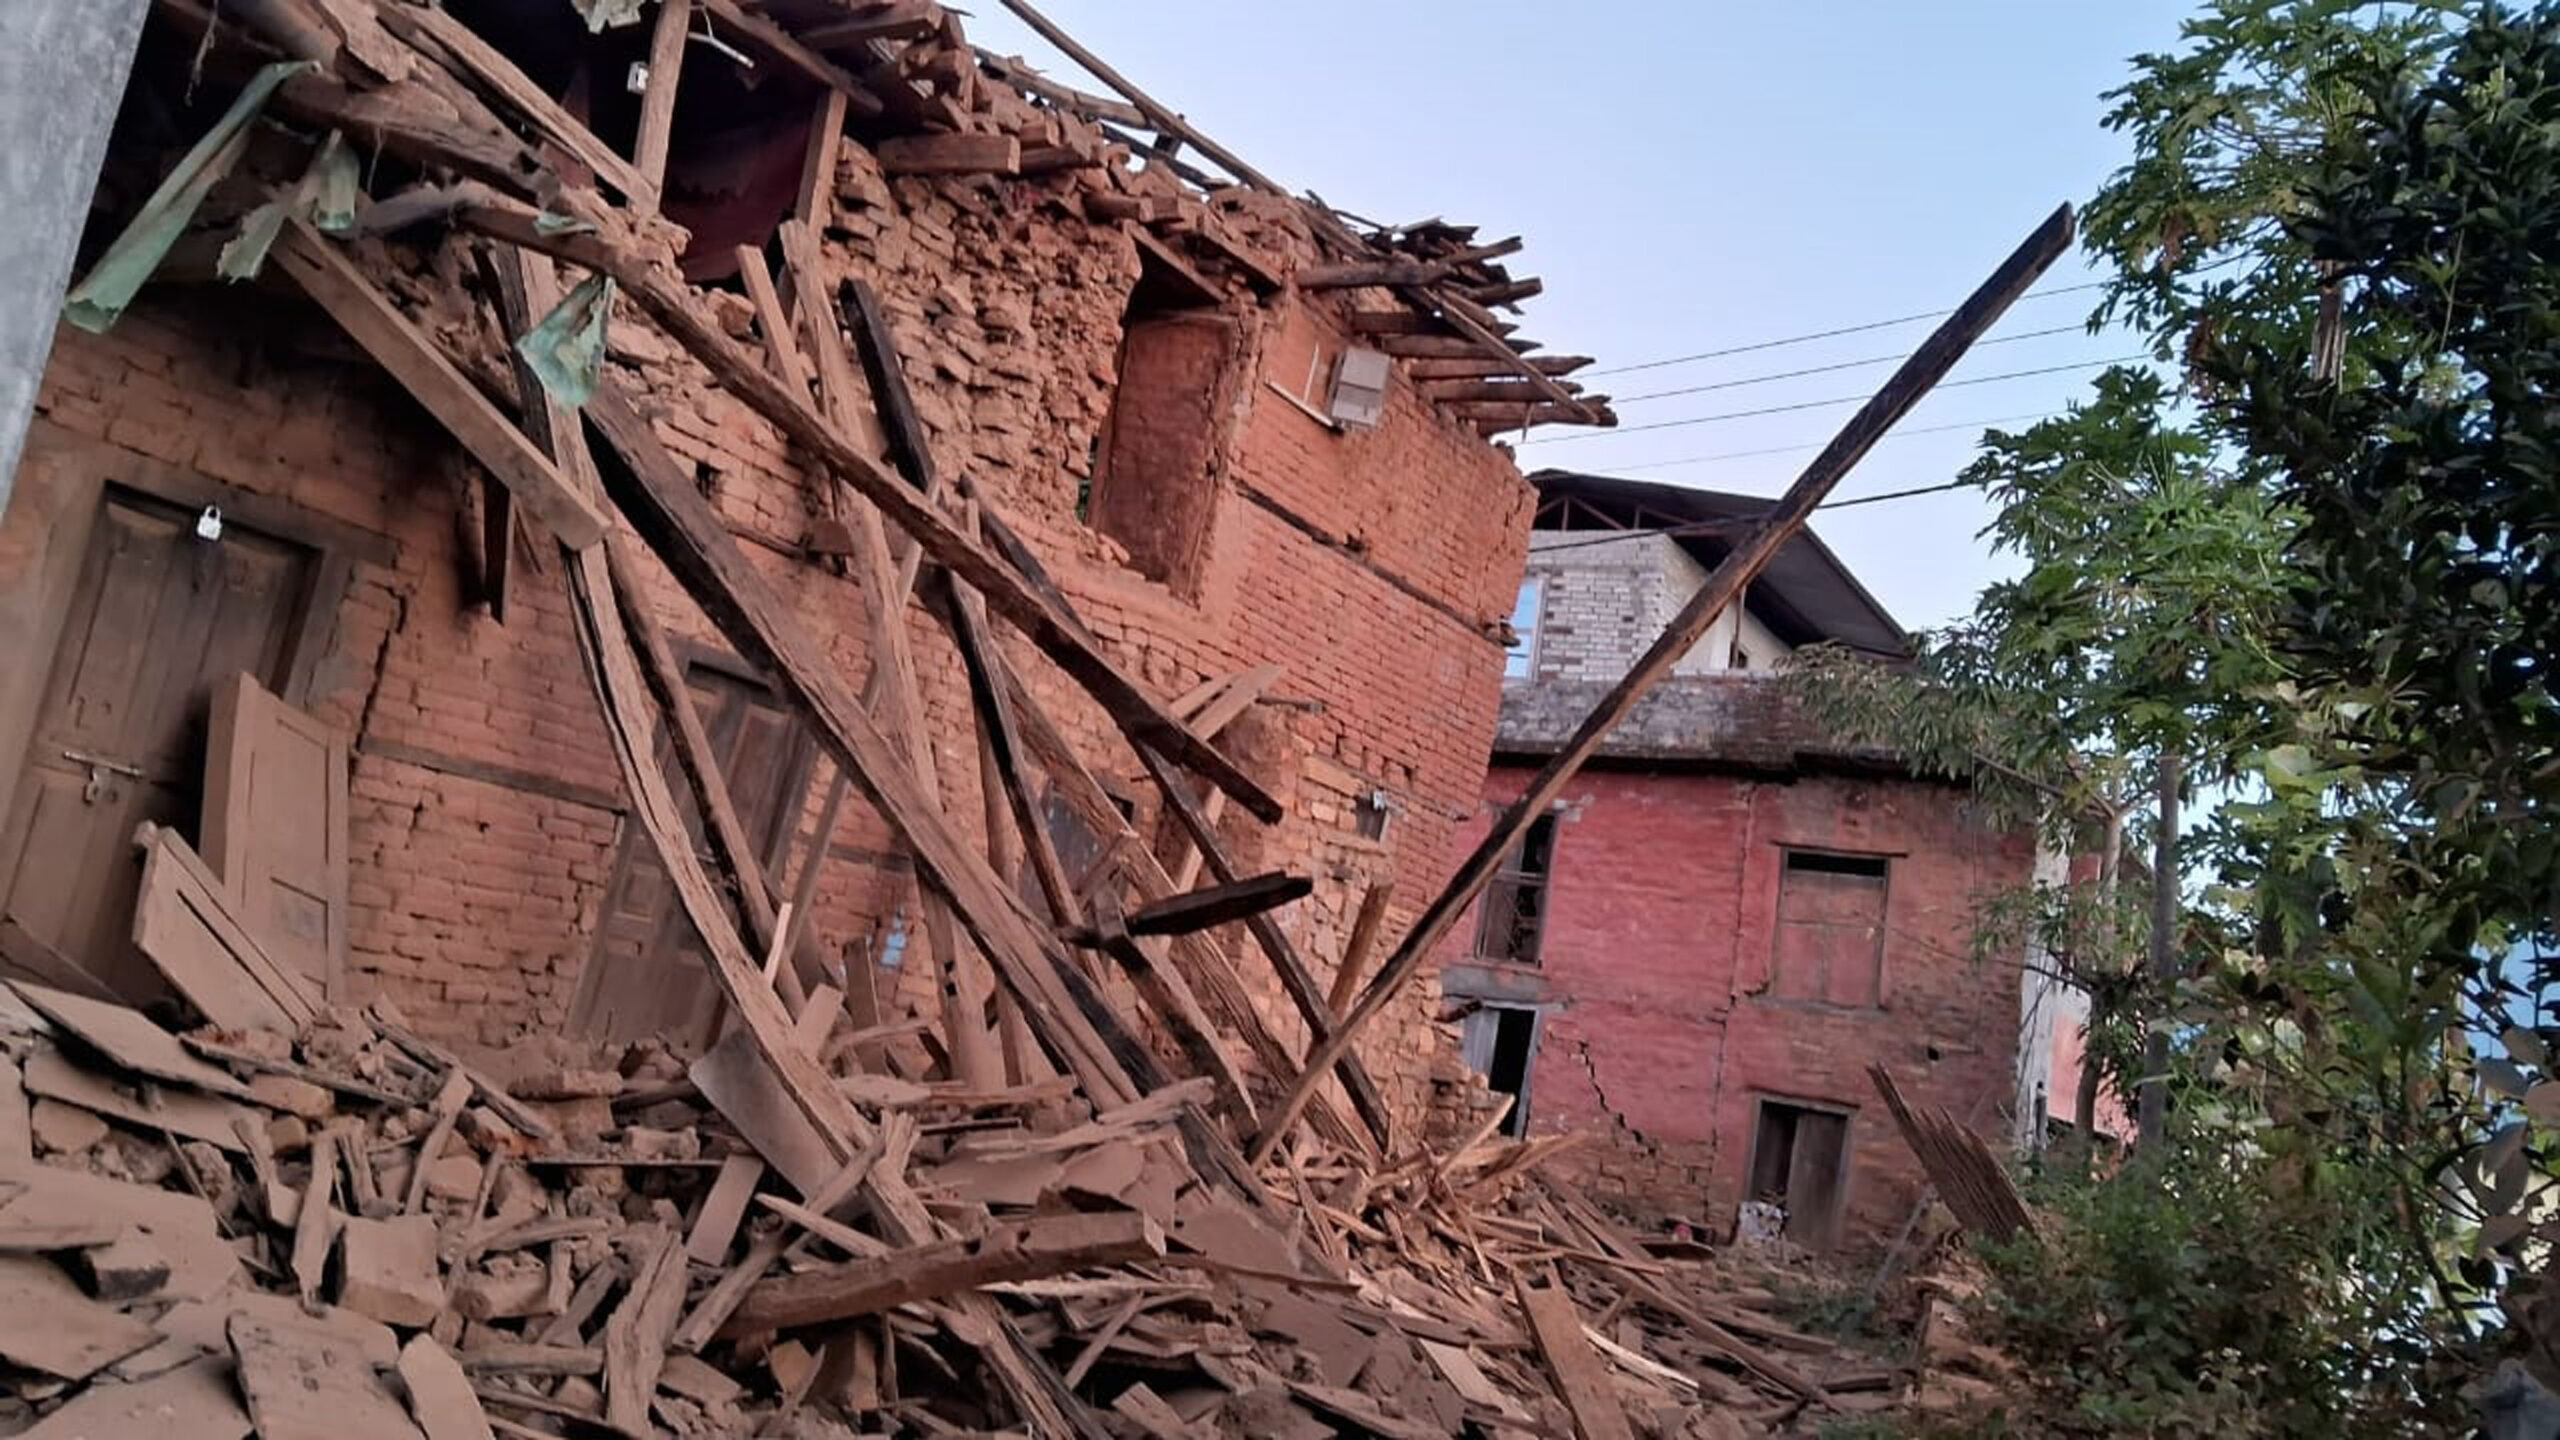 133 dead and 185 injured in Jajarkot Earthquake